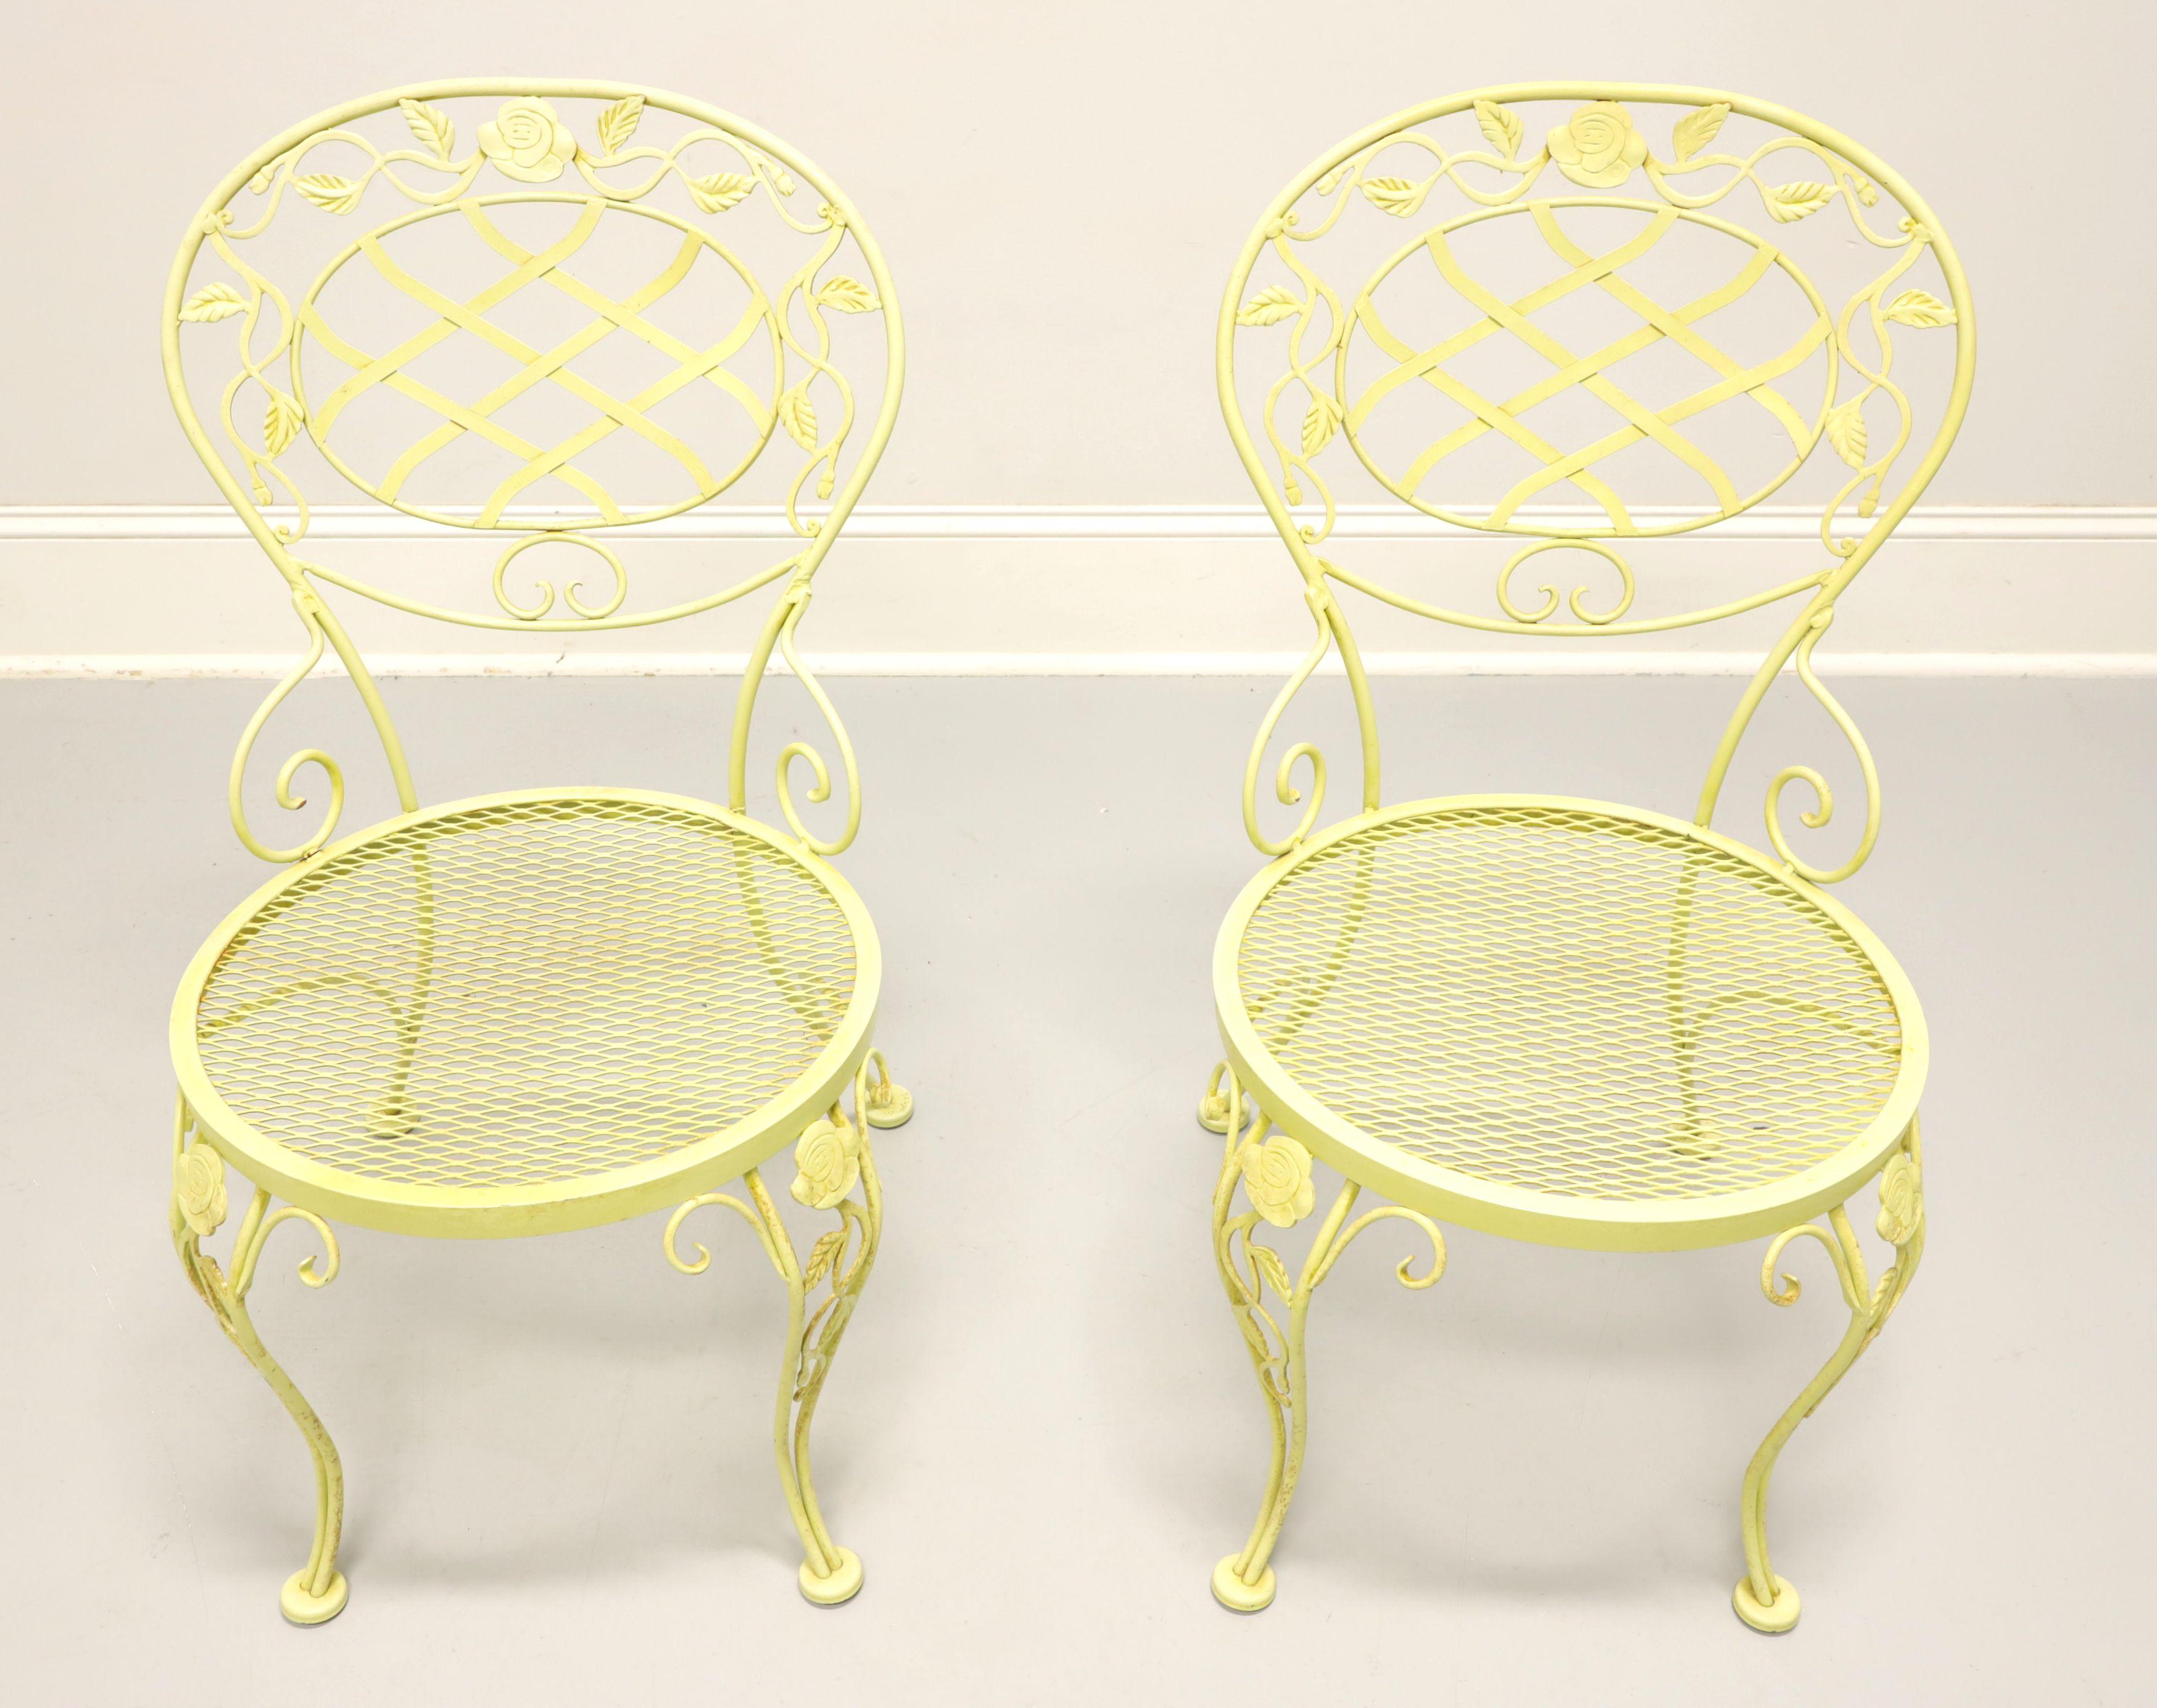 A pair of Mid 20th Century wrought iron patio side chairs in the Regency style by Woodard Furniture, their Chantilly Rose. Wrought iron metal frame, yellow painted finish, rounded back with lattice design center, roses & leaves adornments, mesh